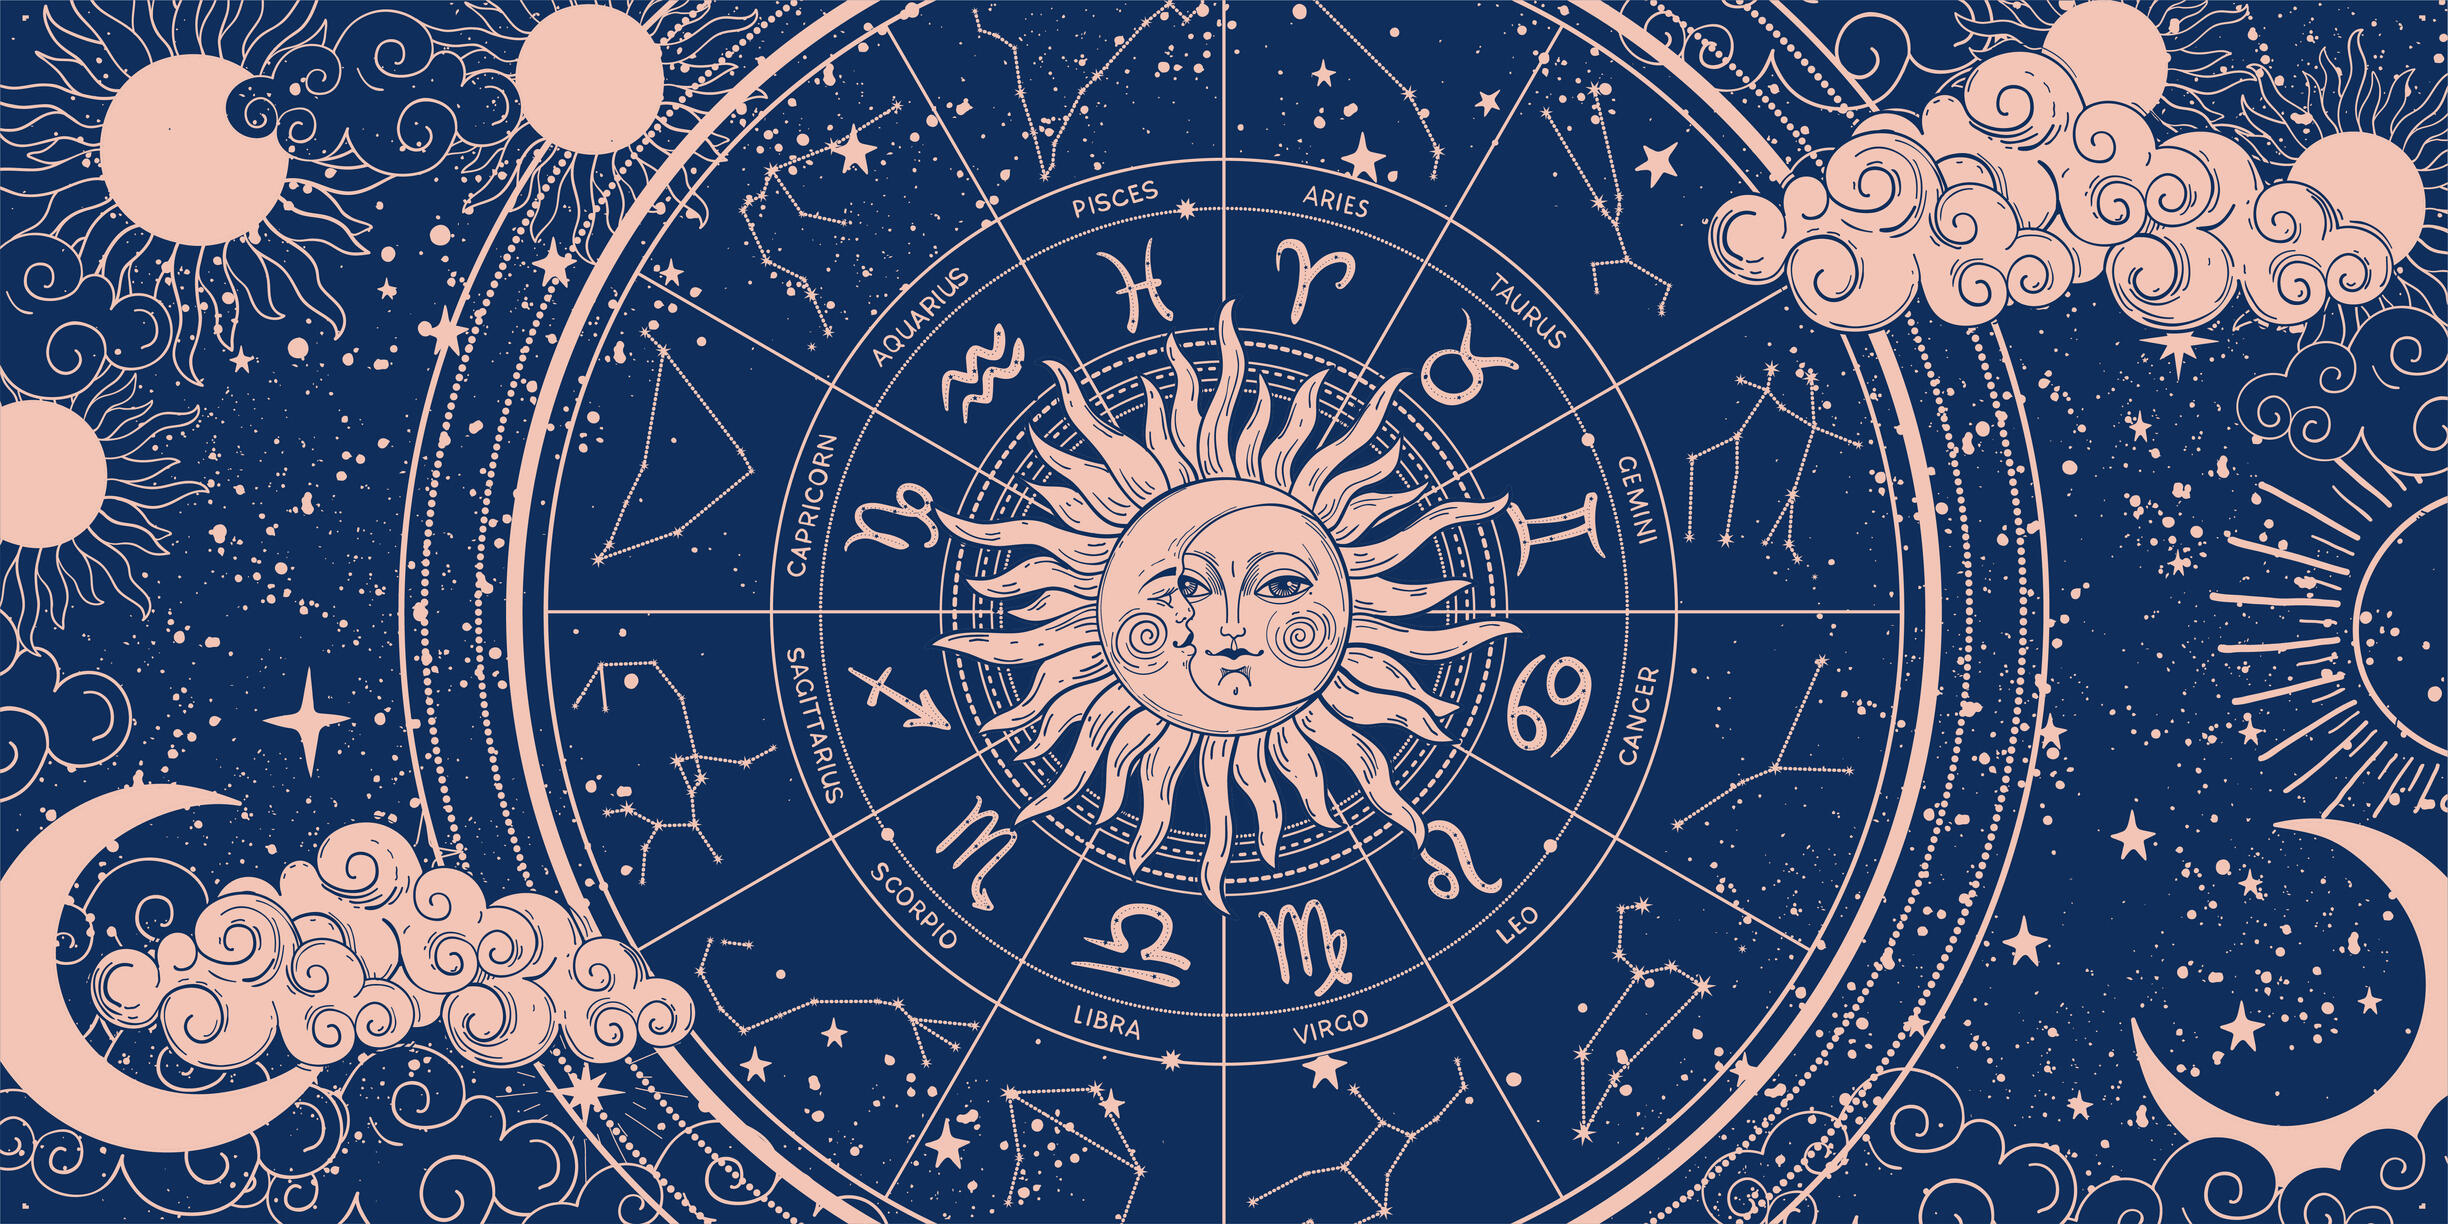 Your Daily Horoscope: Here's What's In Store For February 26th